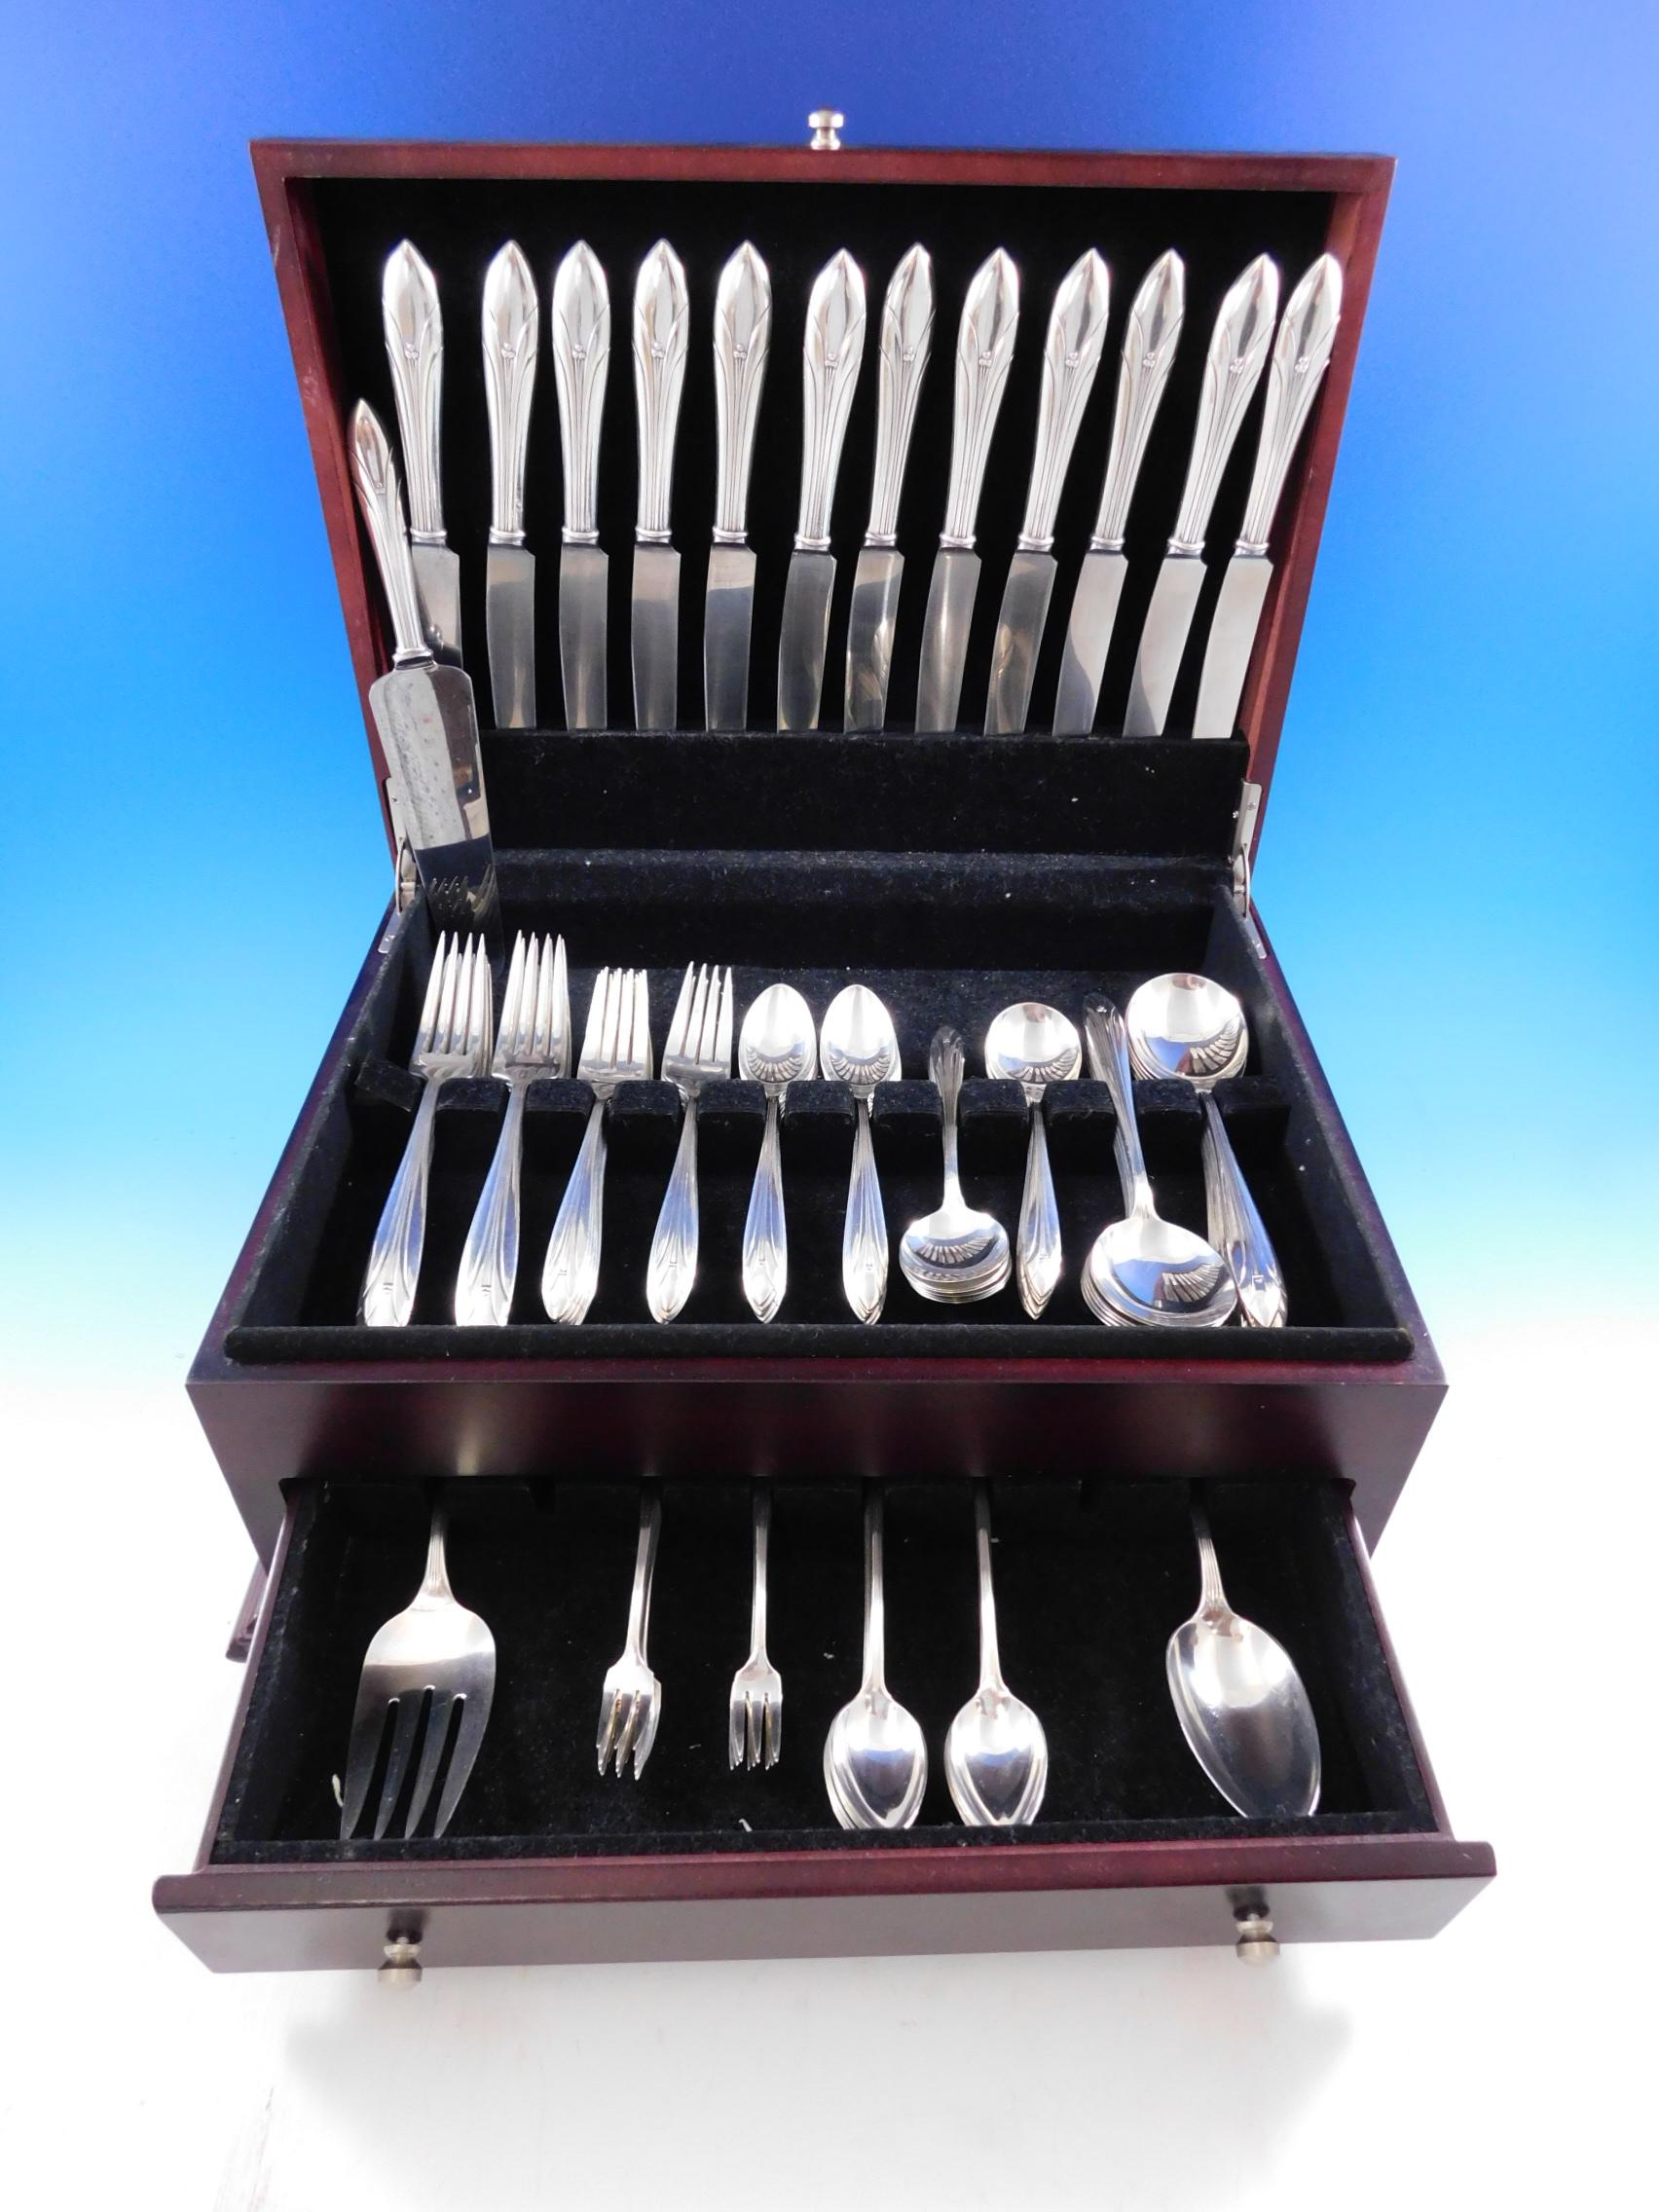 Art Deco dinner size Elsinore by International sterling silver flatware set, 99 pieces. Alfred G. Kintz designed the Elsinore pattern, first introduced in 1931, which features a flared handle with tapered tip, scalloped detailing, and beaded